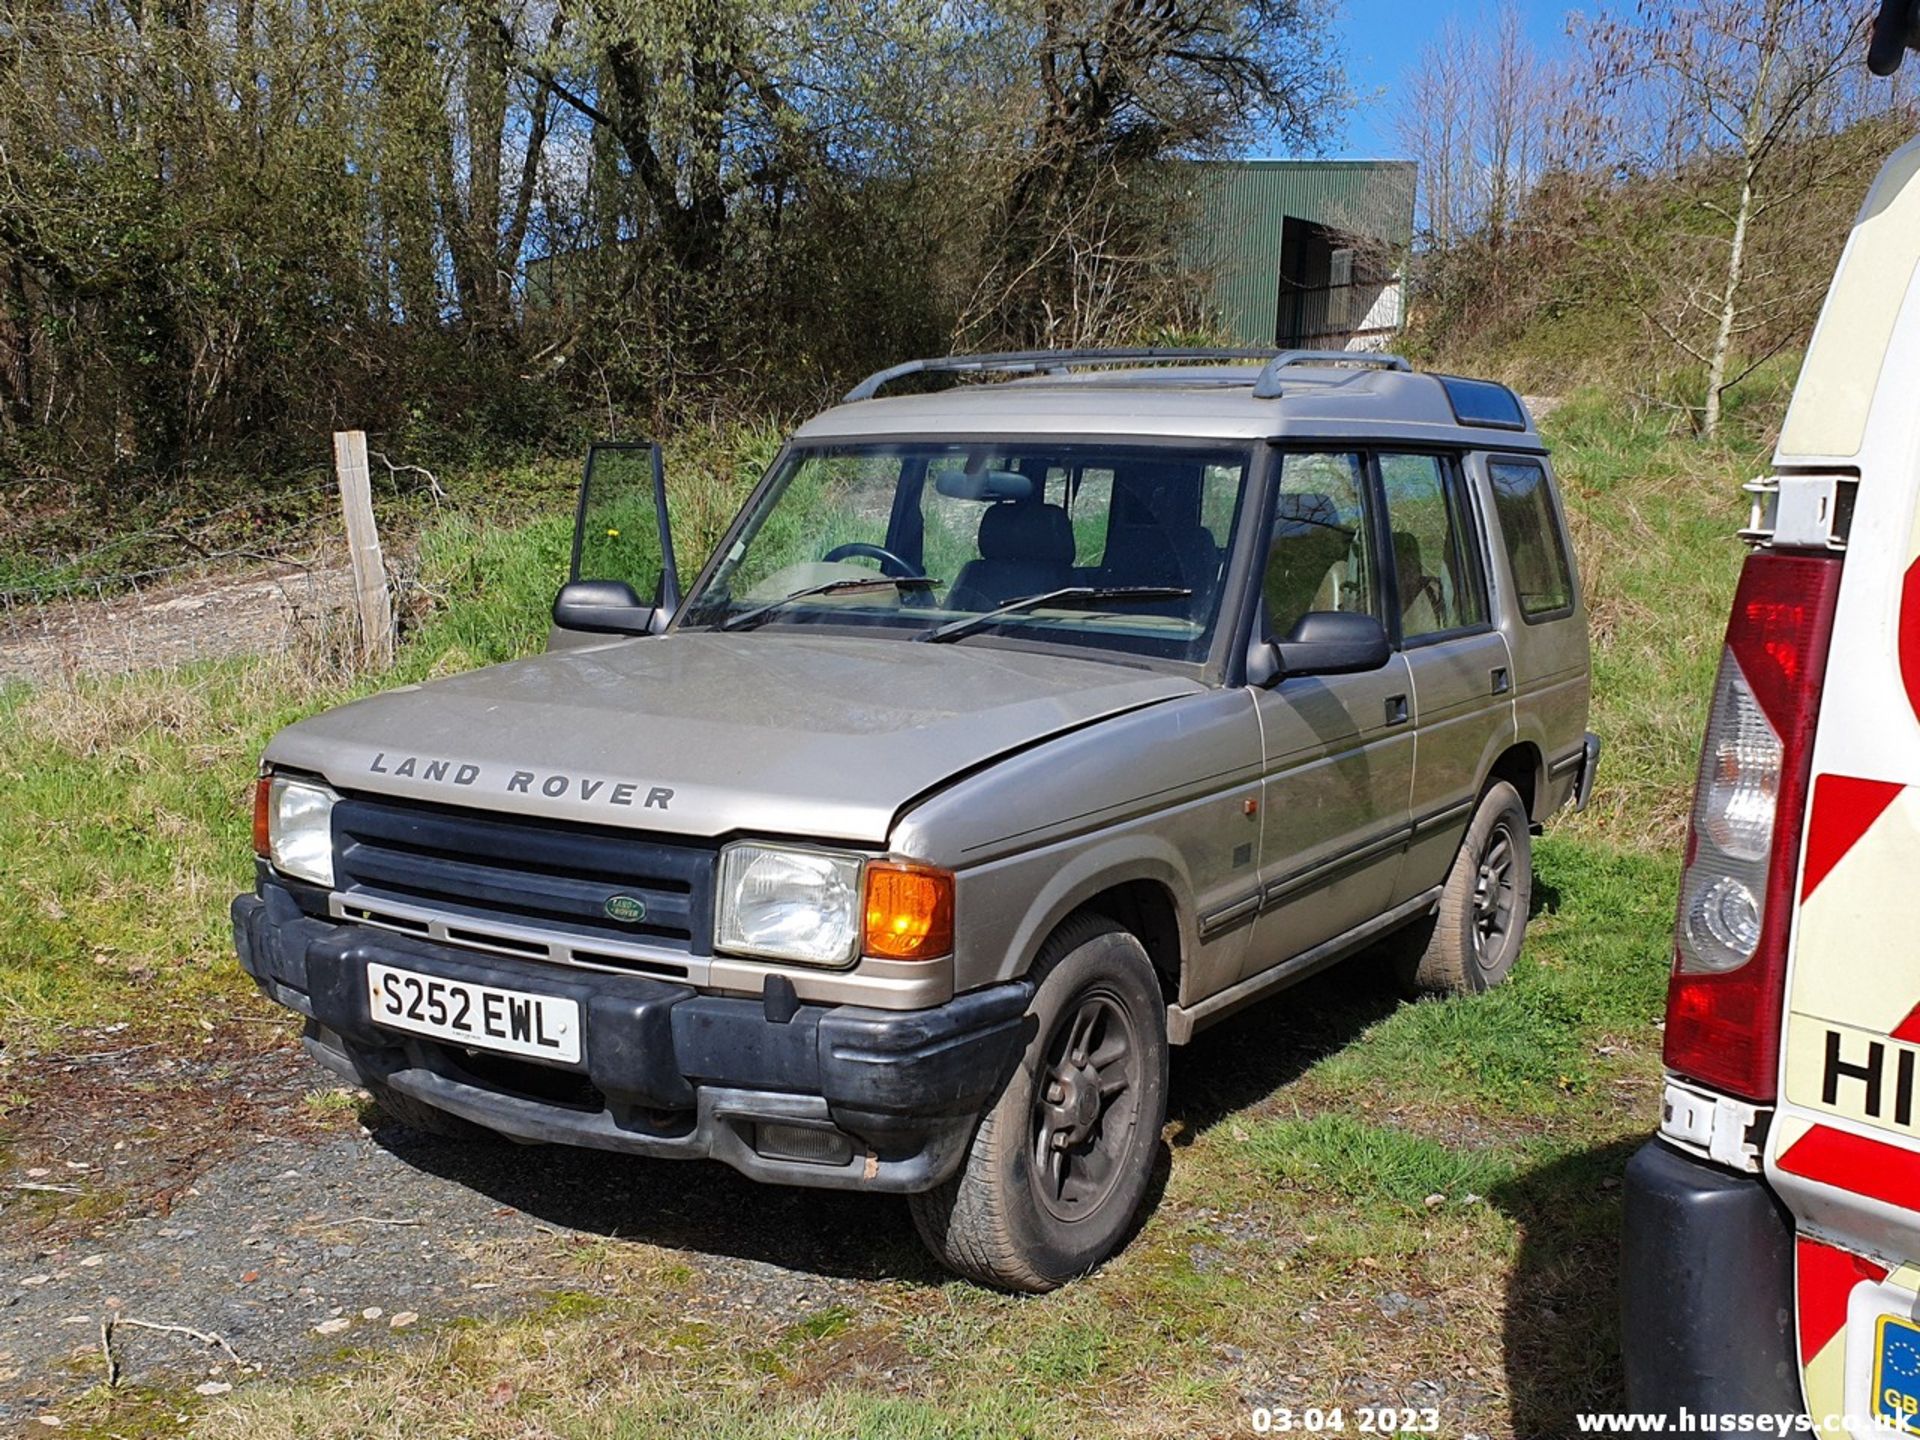 1998 LAND ROVER DISCOVERY ES TDI - 2495cc 5dr Estate (Gold) - Image 30 of 31